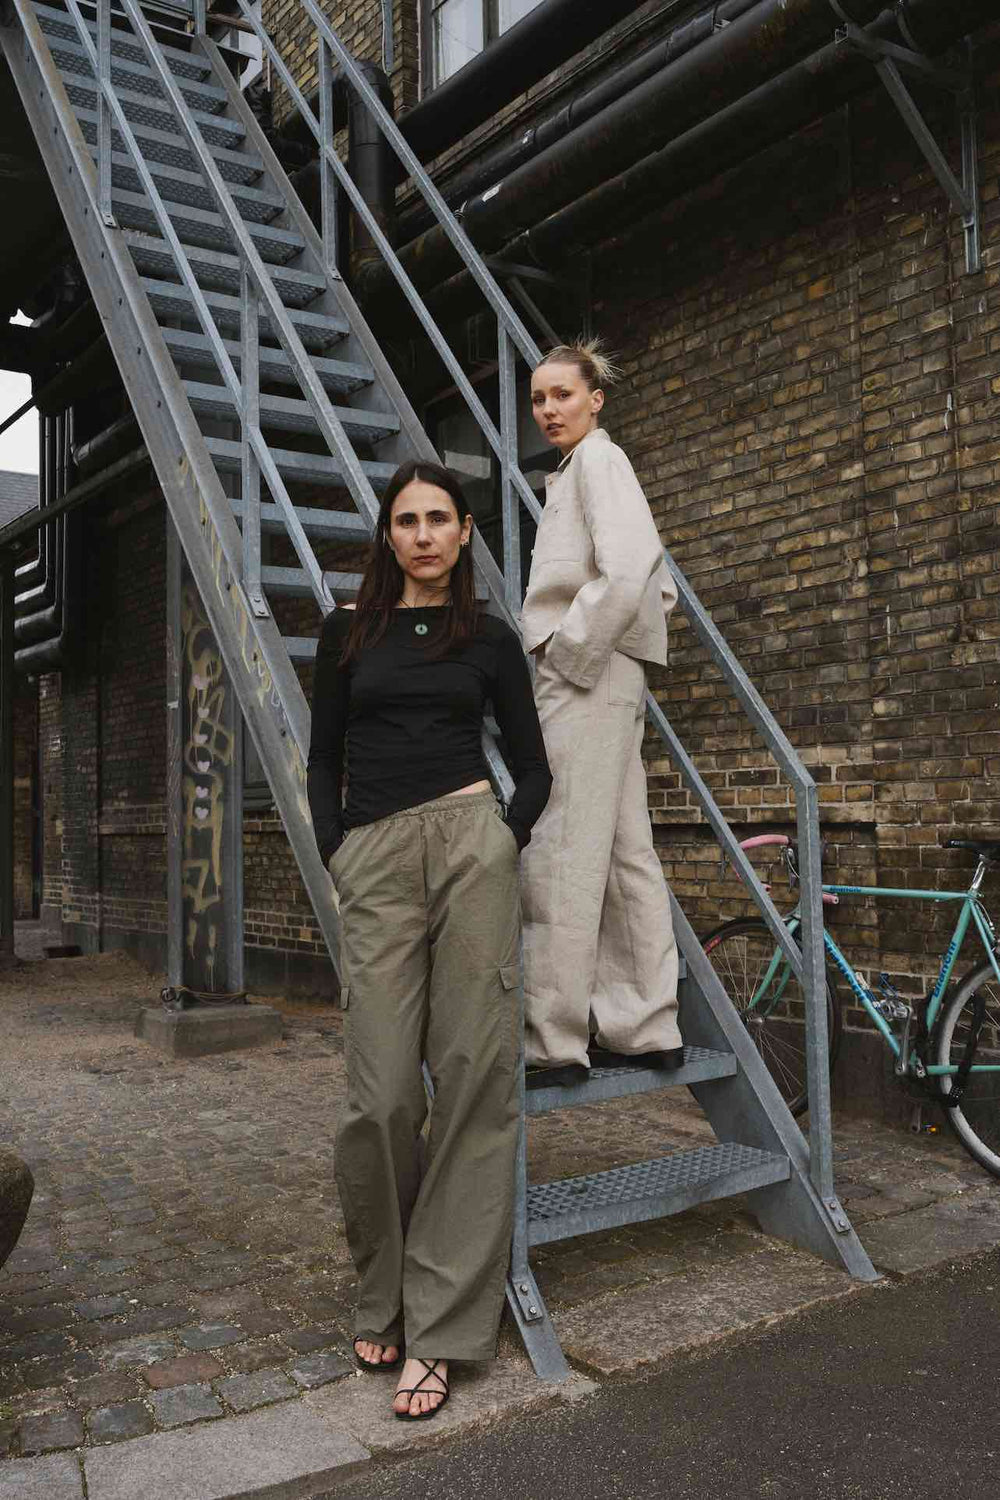 Women wearing the Versa Pants sewing pattern from Puff and Pencil on The Fold Line. A trousers pattern made in cotton twill, linen and taslan fabrics, featuring an adjustable elastic waist cord, front, back and side pockets, relaxed fit, wide straight leg